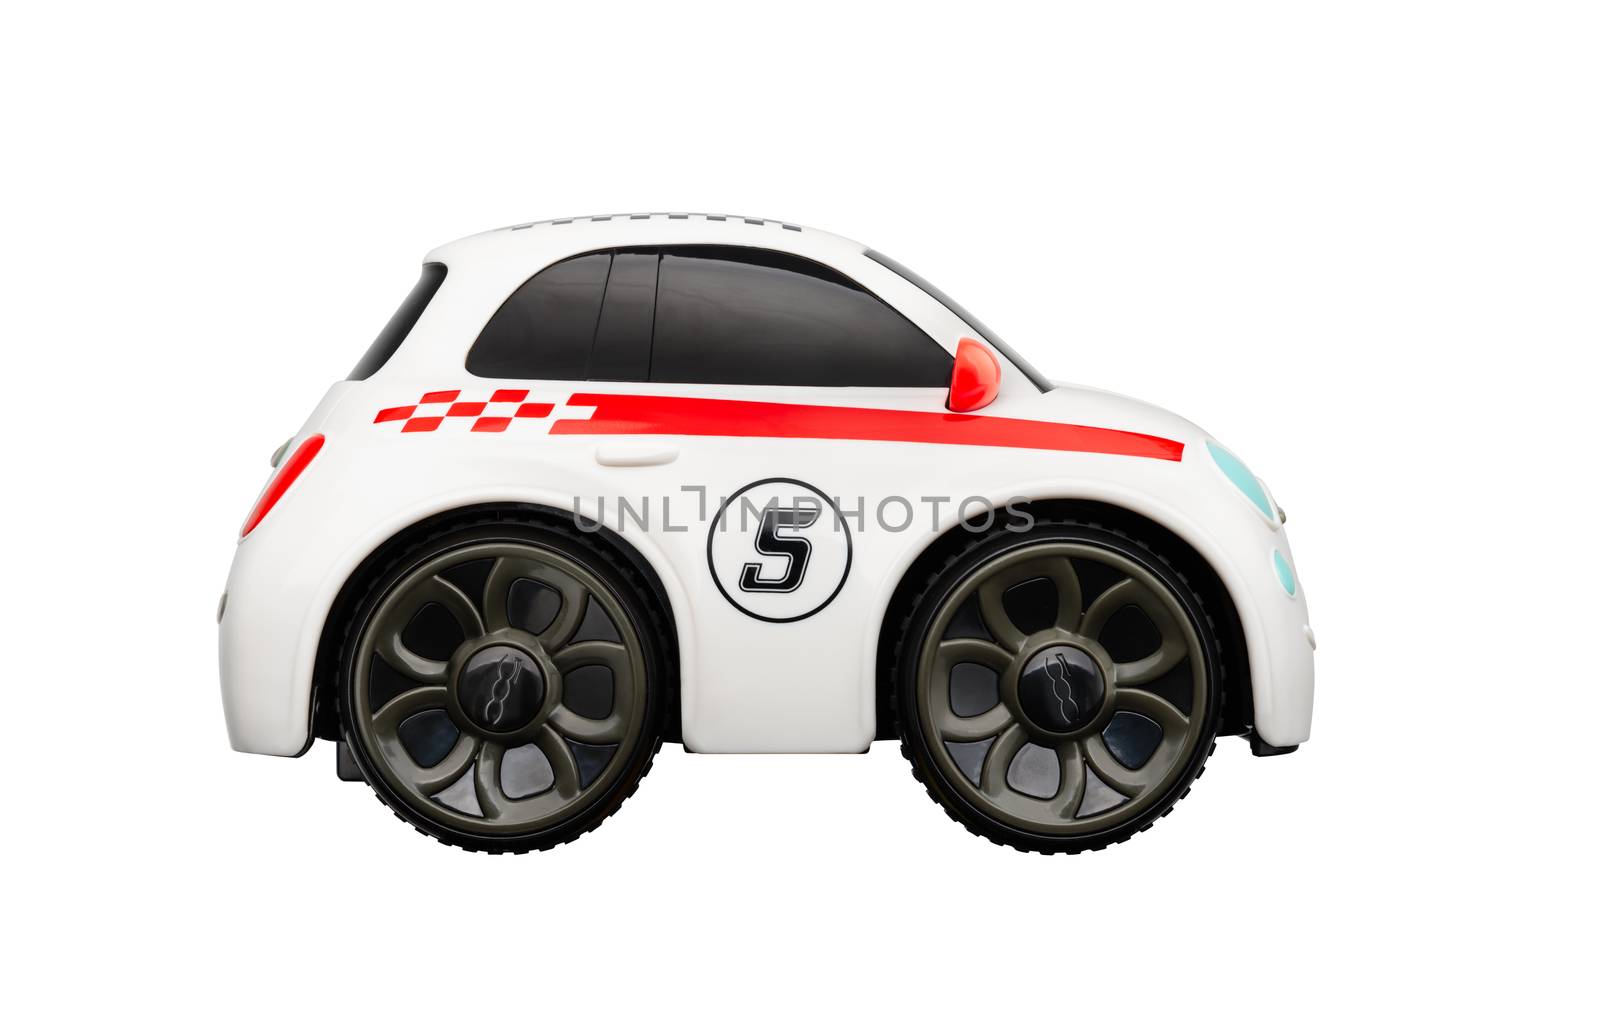 BAYONNE, FRANCE - CIRCA MARCH 2020: Chicco Fiat 500 remote control car isolated on white background.